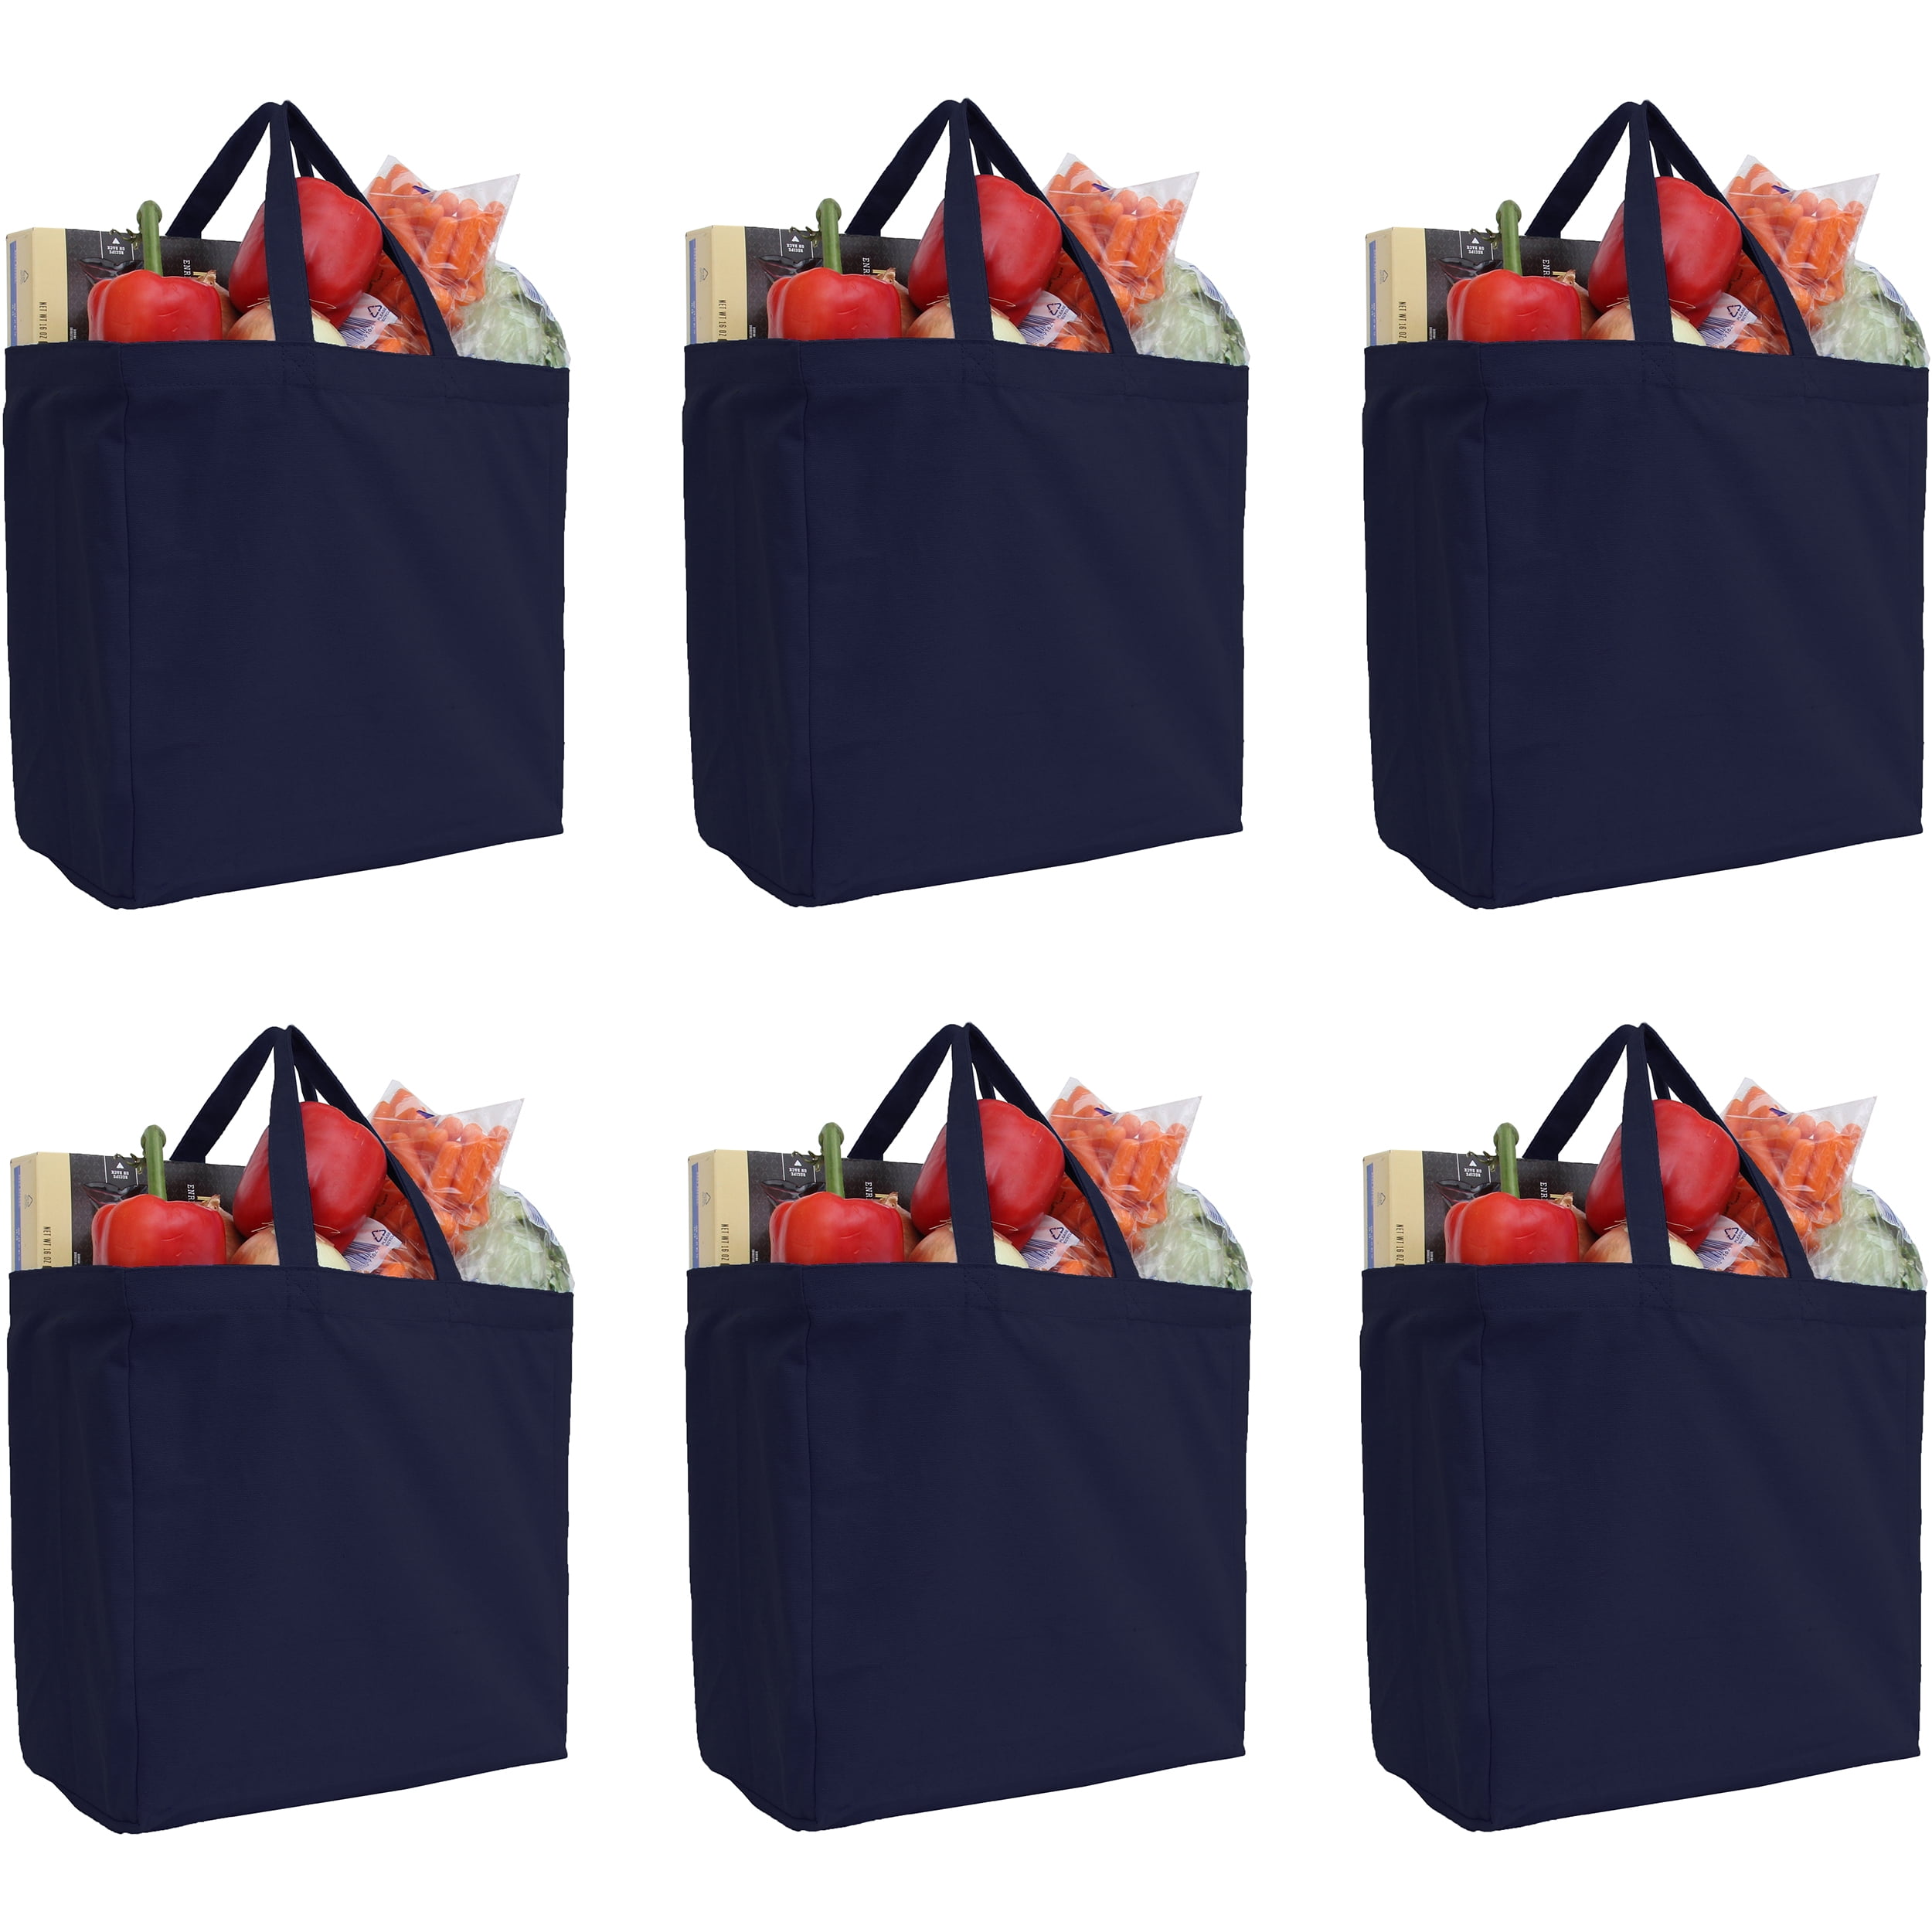 Reusable Heavy Duty 100% Cotton Canvas Grocery Bags | Pack of 6 | With ...